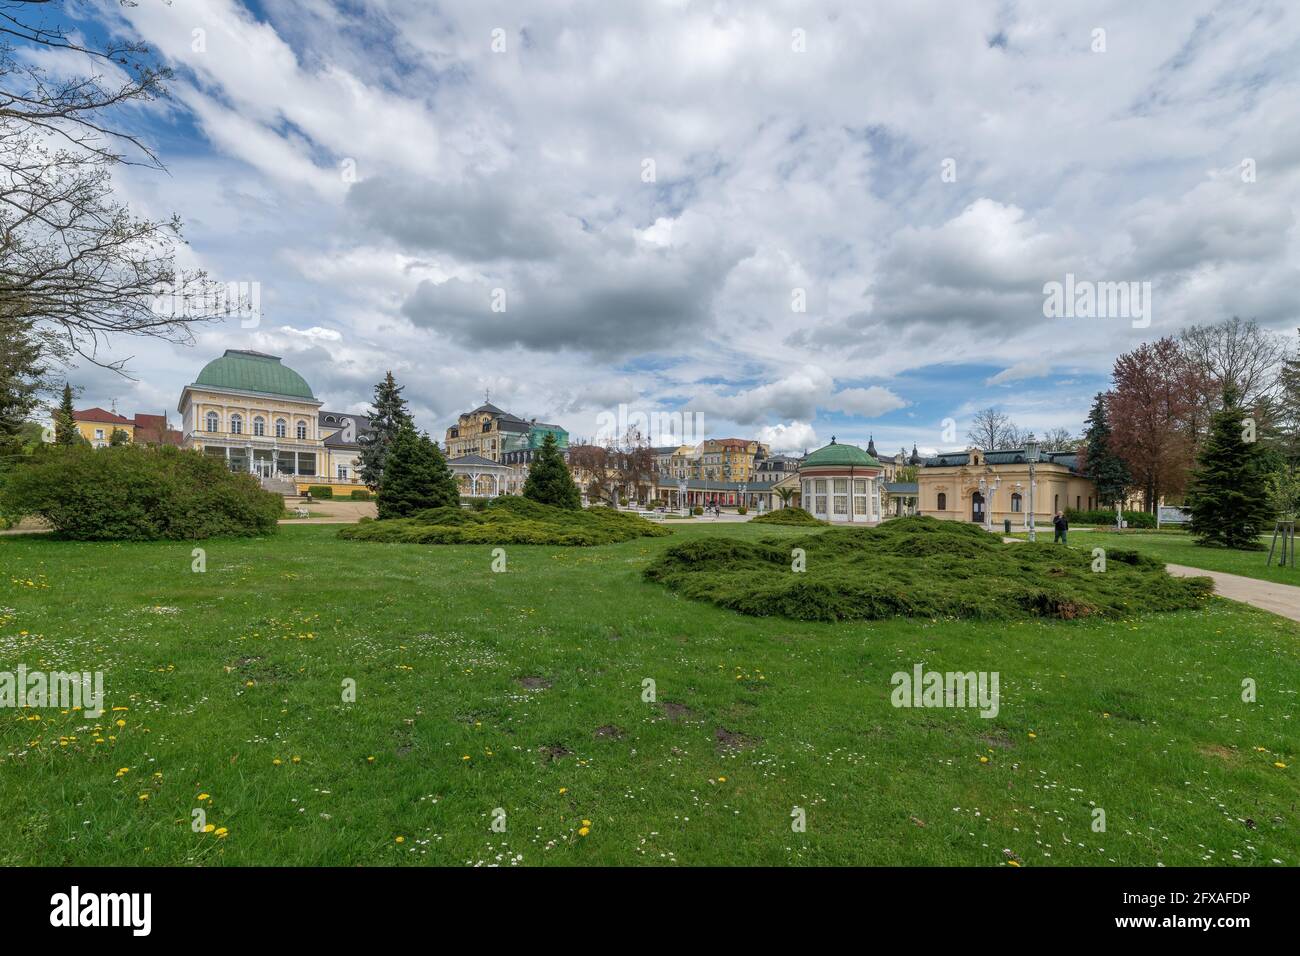 Frantiskovy Lazne (Franzensbad) - center of famous great Czech spa town in the western part of the Czech Republic - Europe Stock Photo